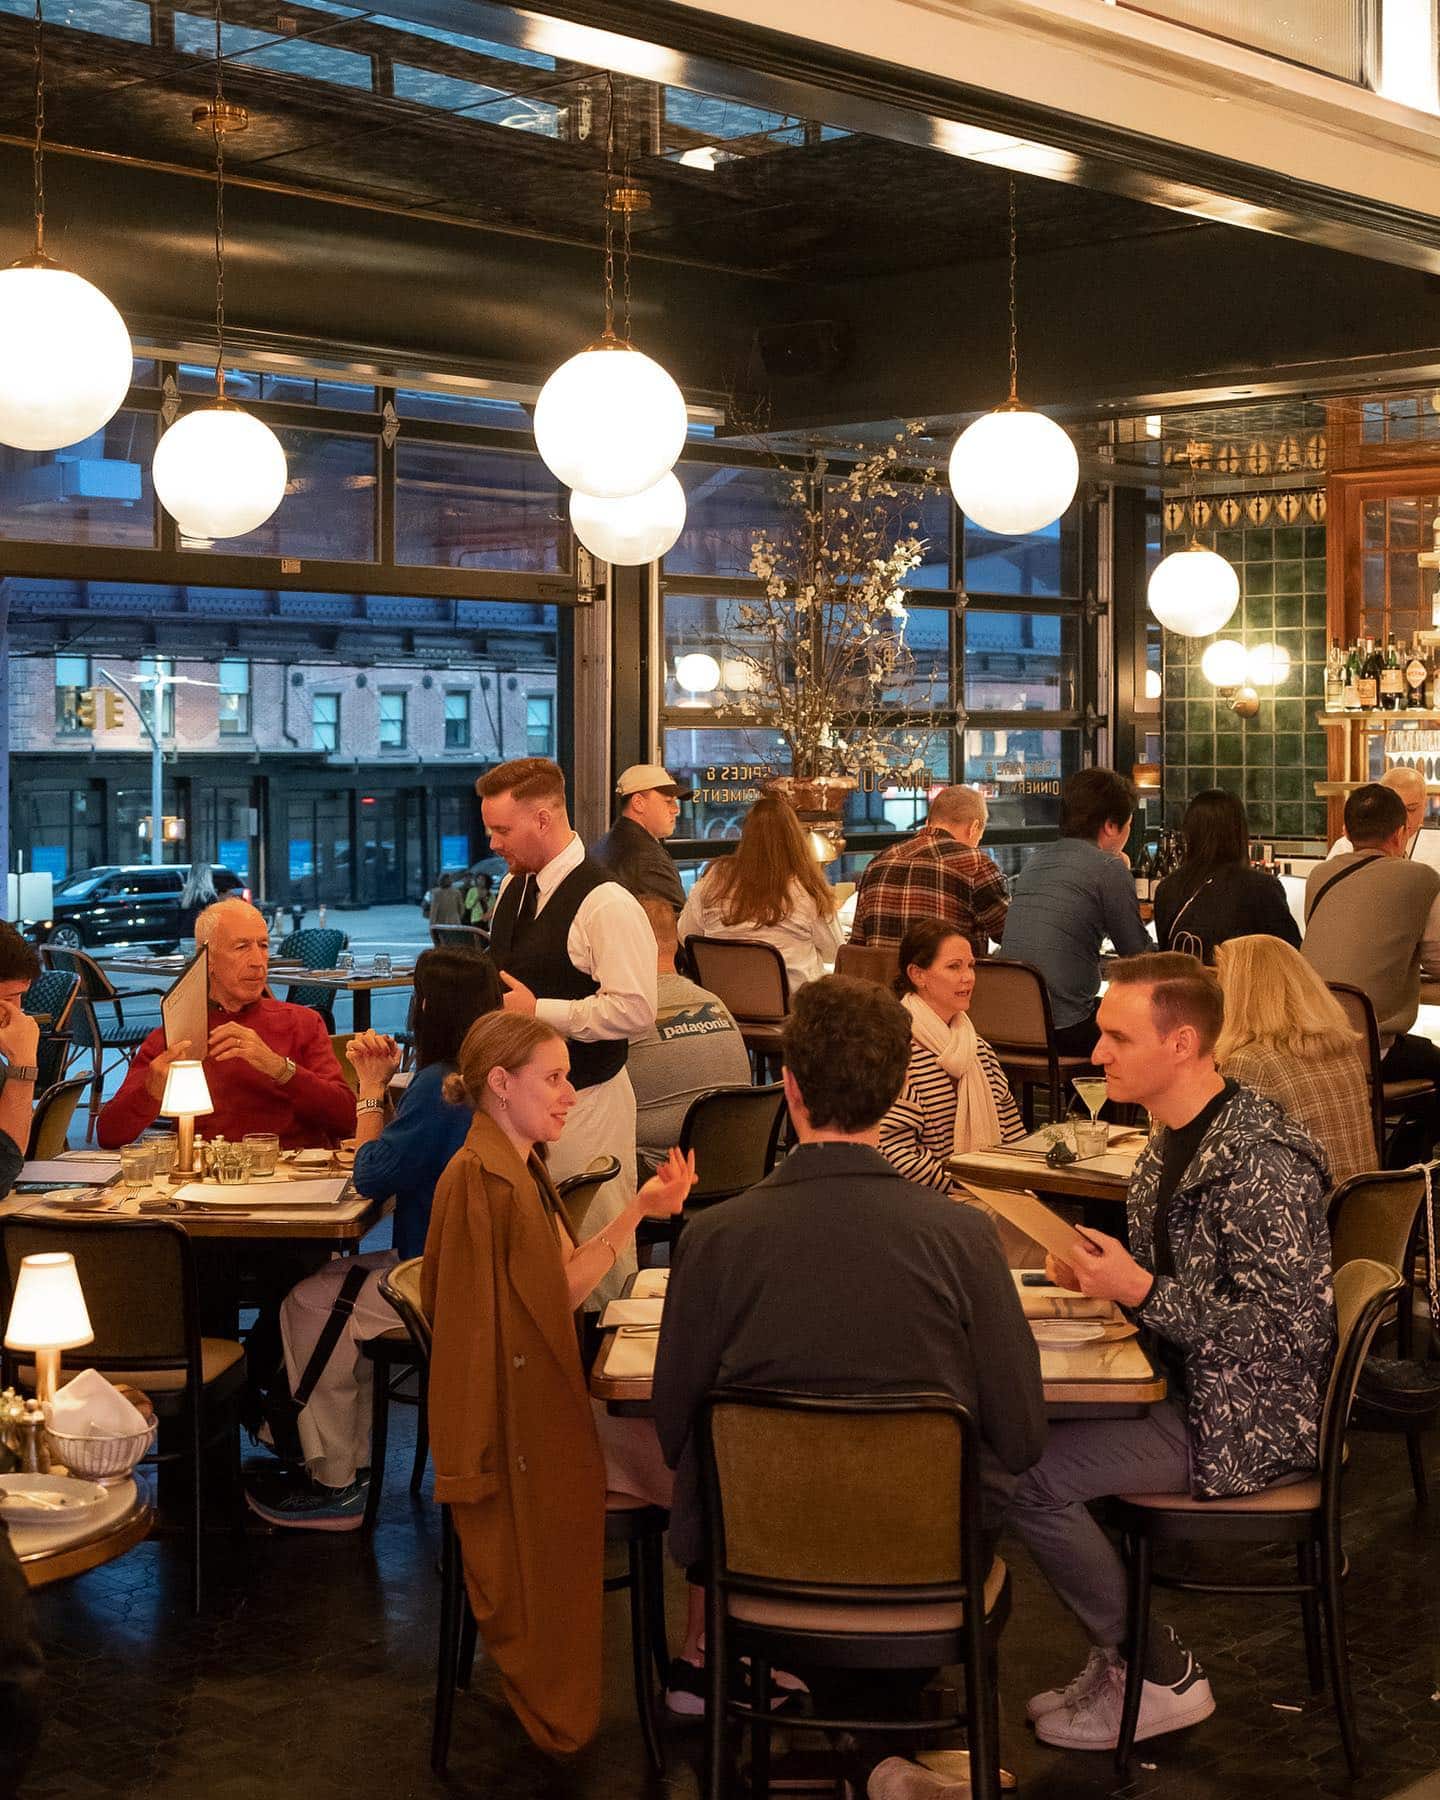 Escape the rain. Cozy up with your crew. Dinner options are endless inside the @tinbuilding. #TheSeaport